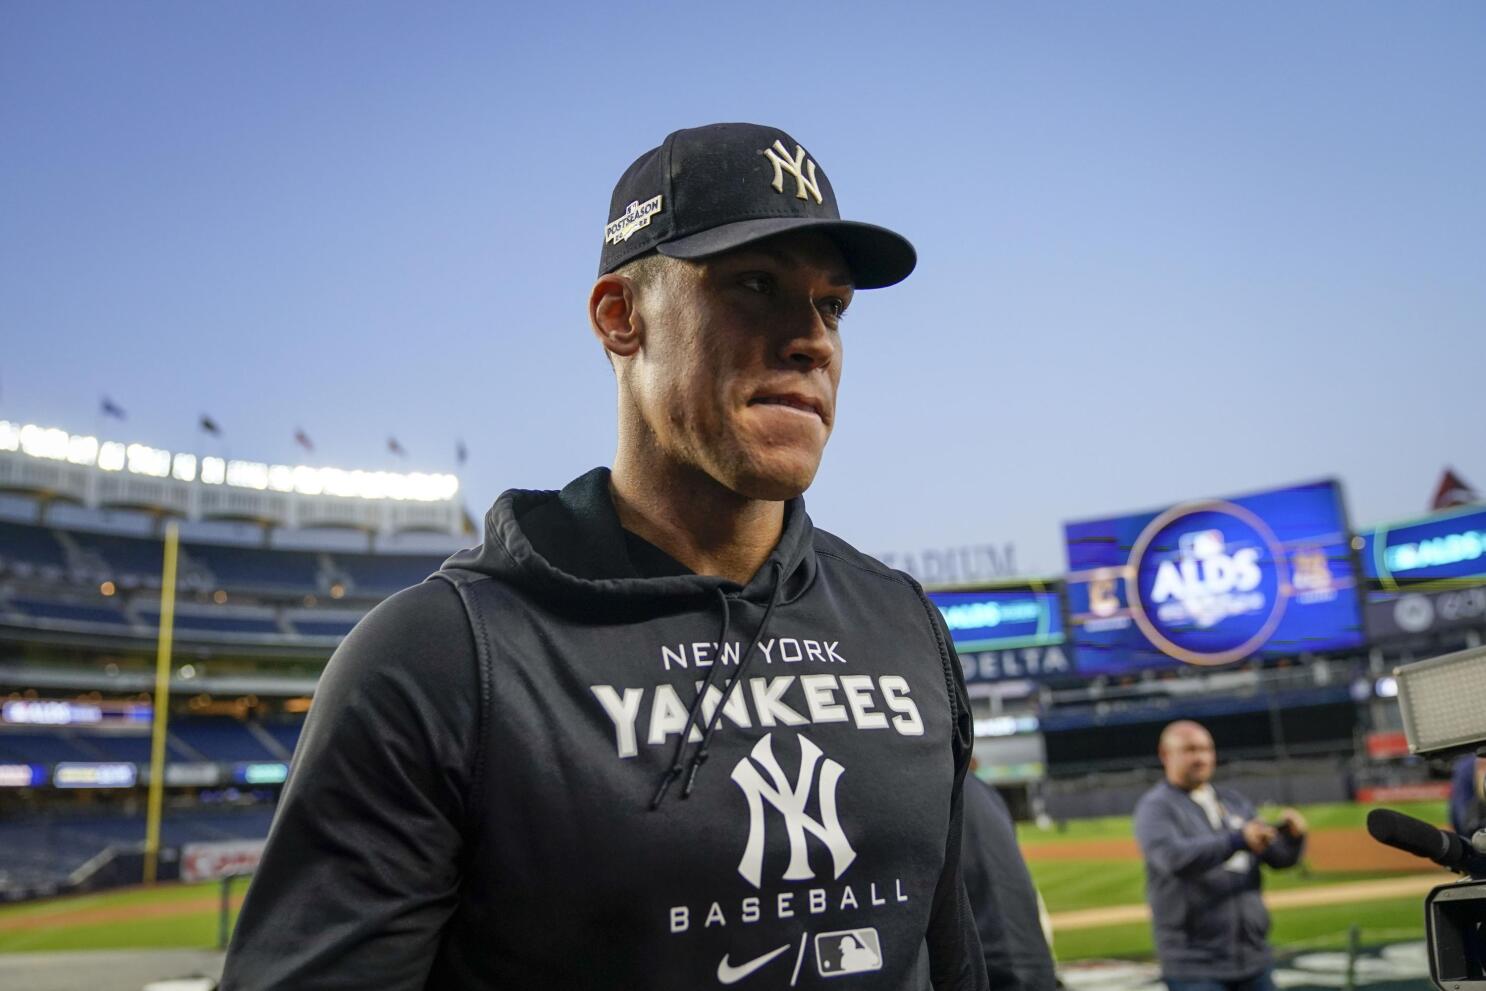 Guardians expect rowdy Bronx fans for Yanks playoff matchup